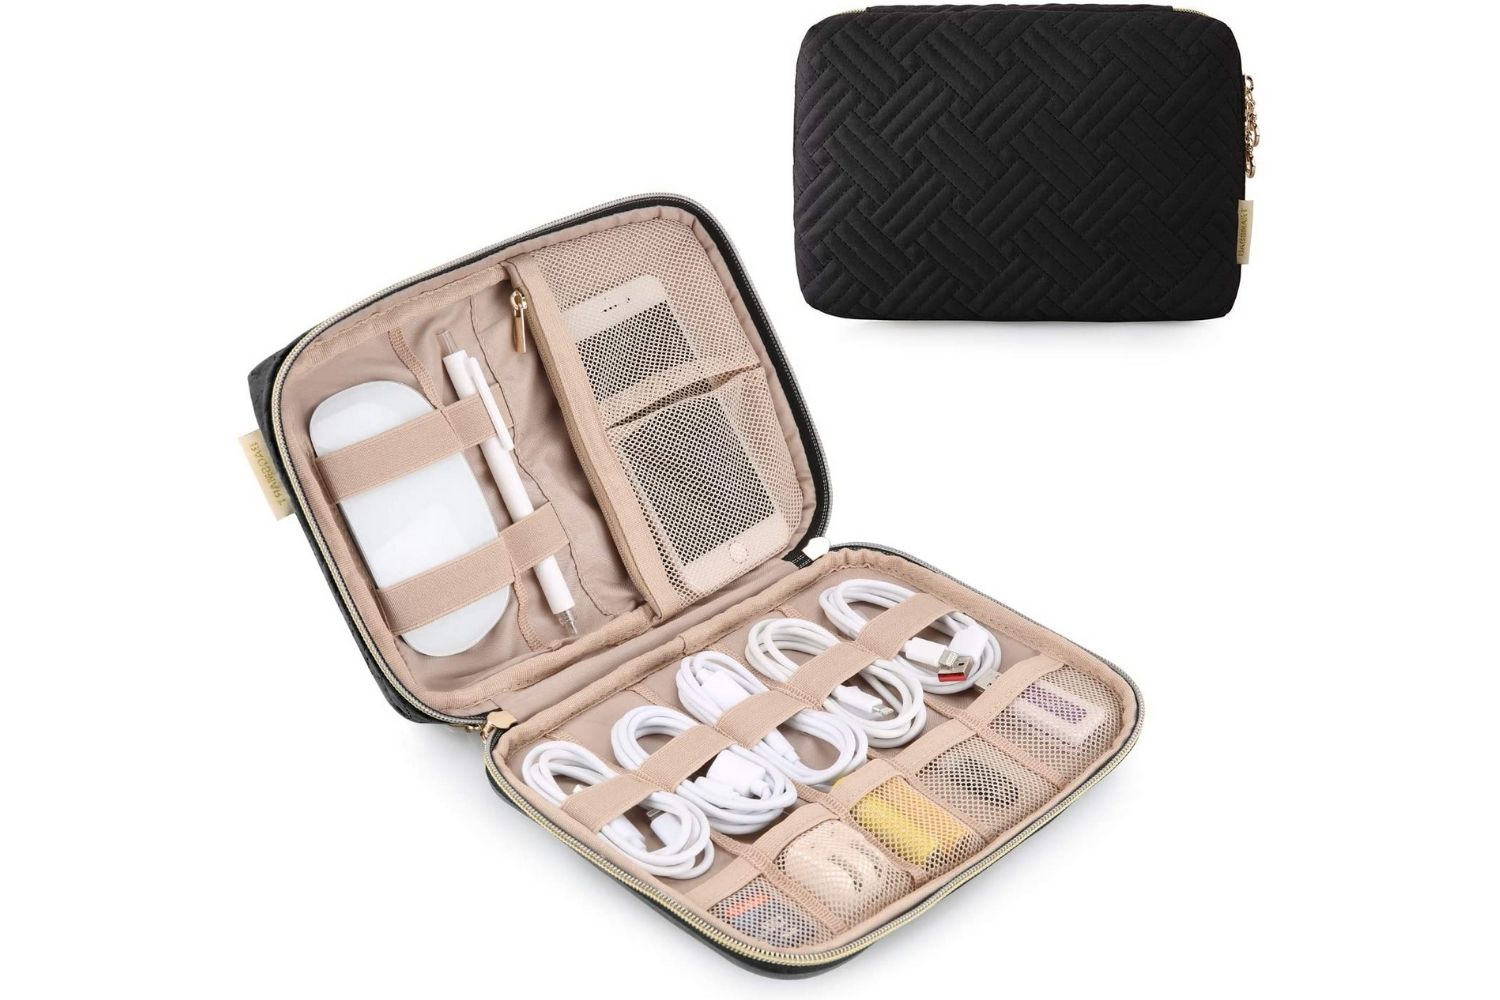 The Best Travel Gifts Option: BAGSMART Electronic Organizer